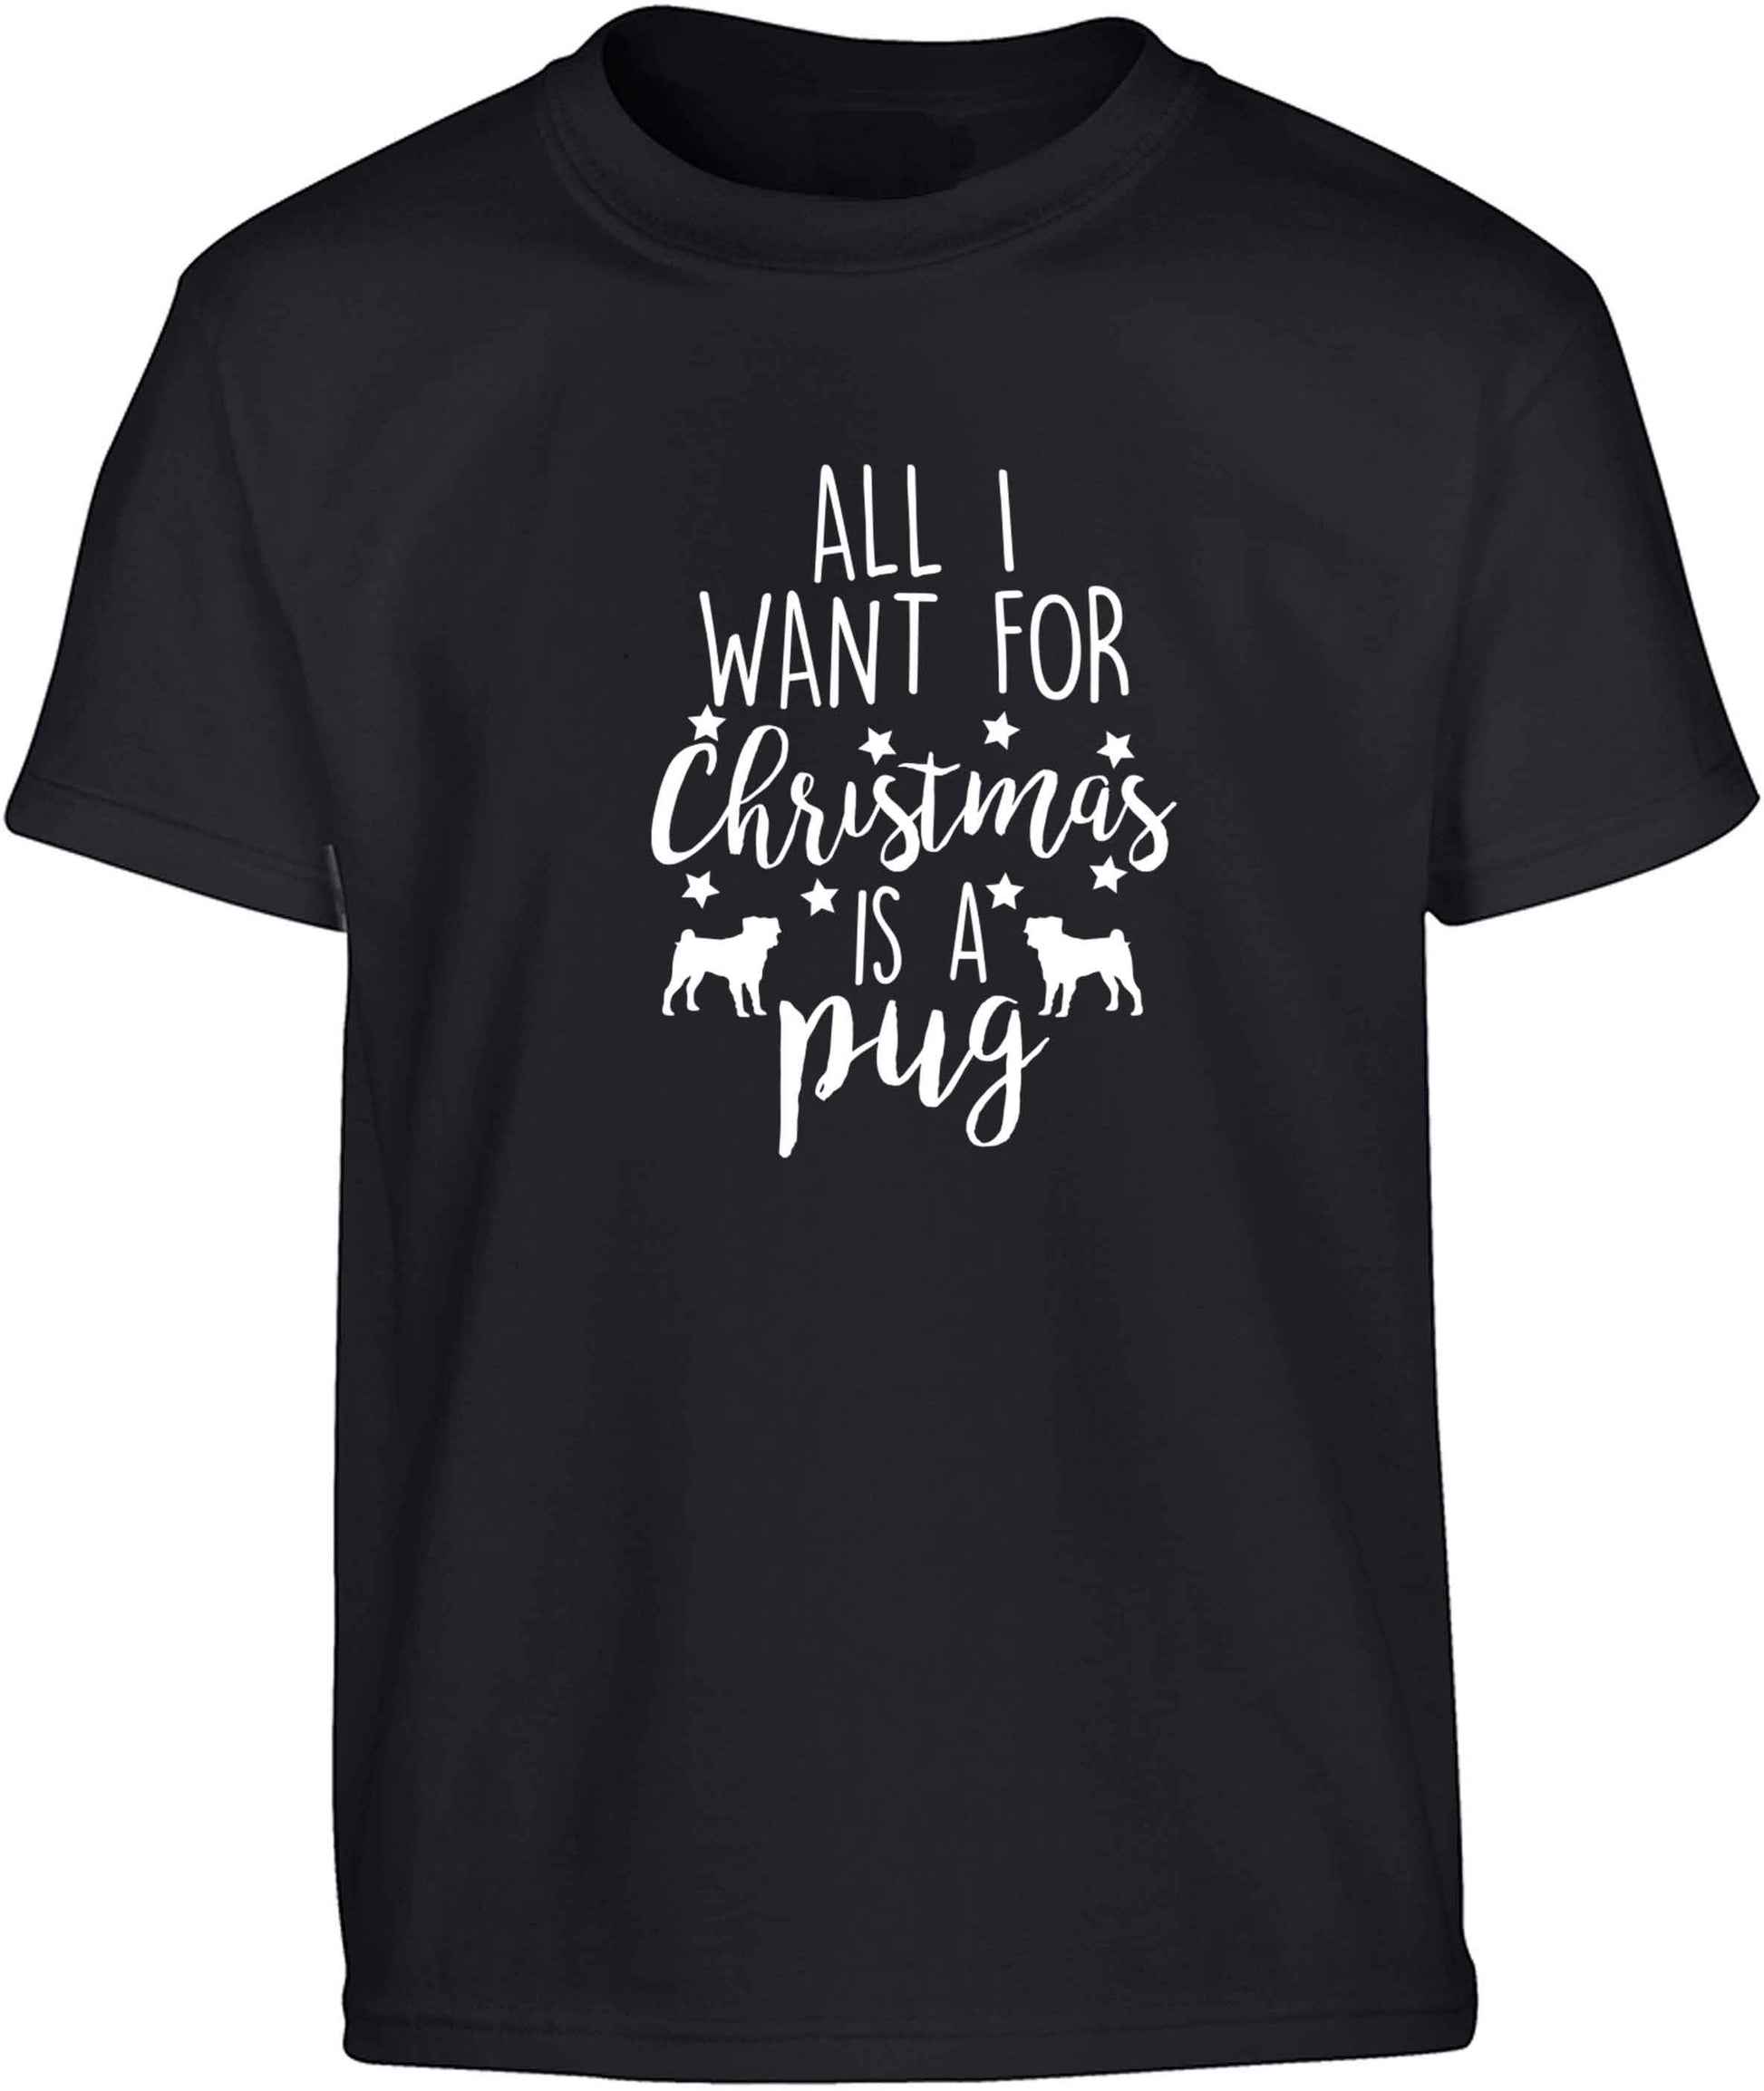 All I want for Christmas is a pug Children's black Tshirt 12-13 Years